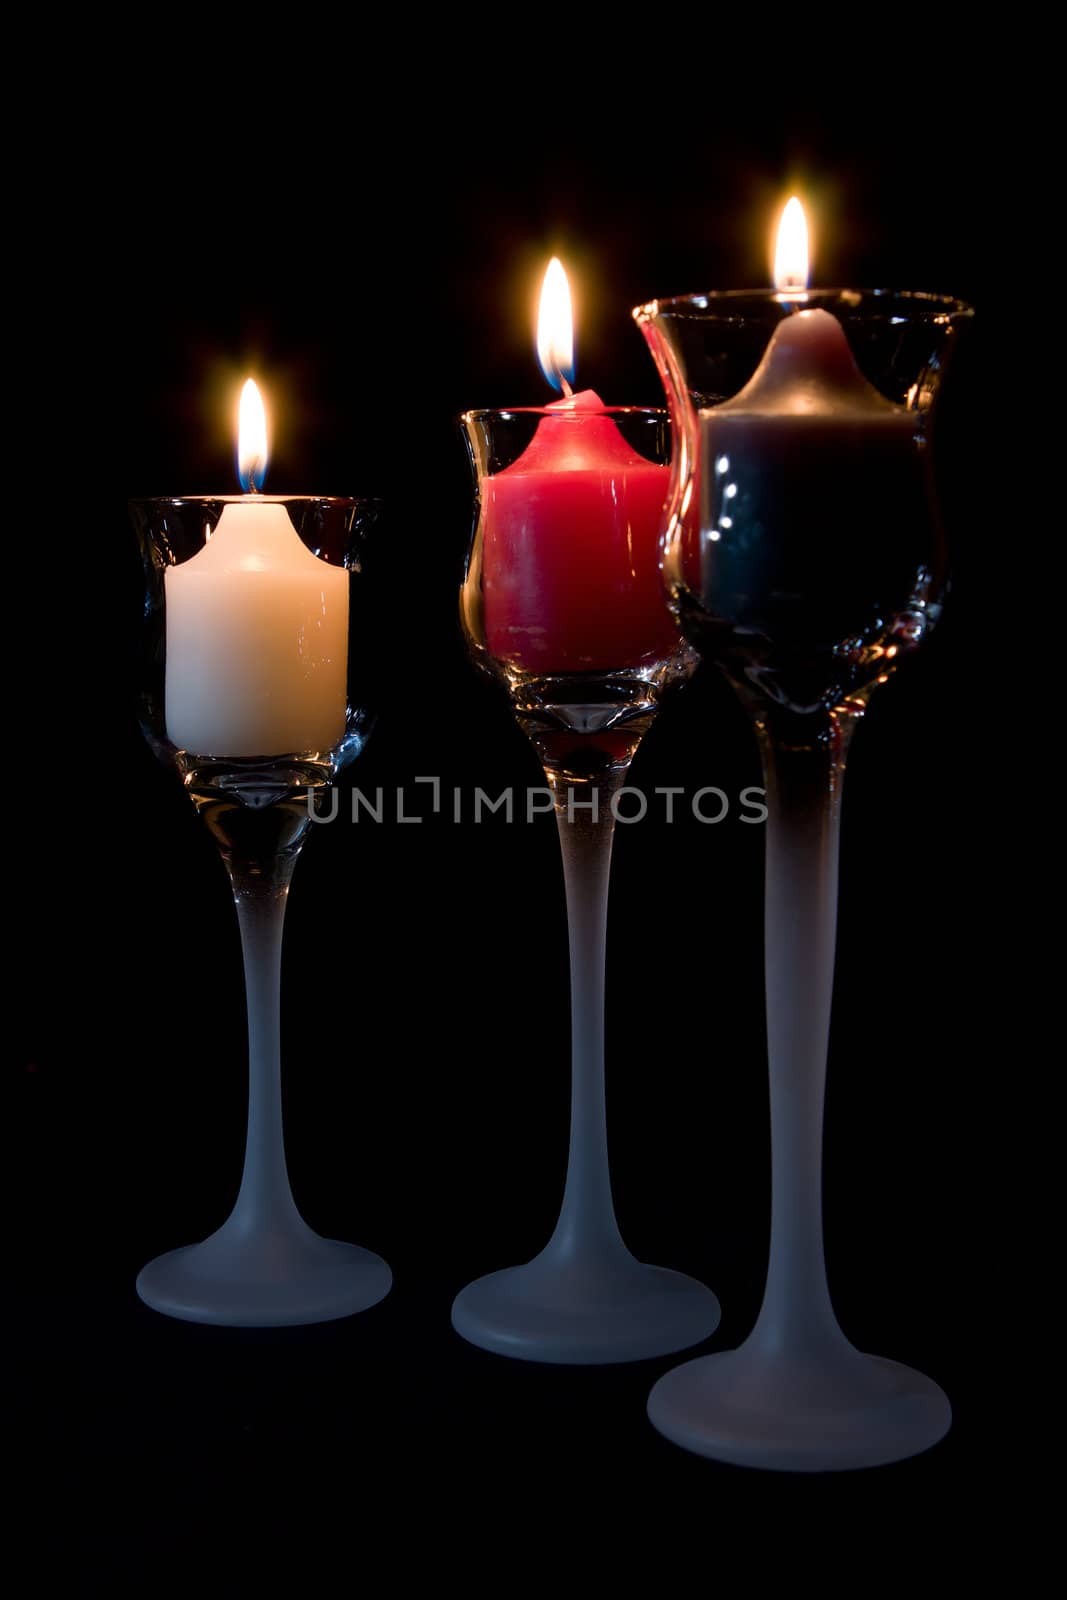 Candles burning in decorative candle holders by Coffee999